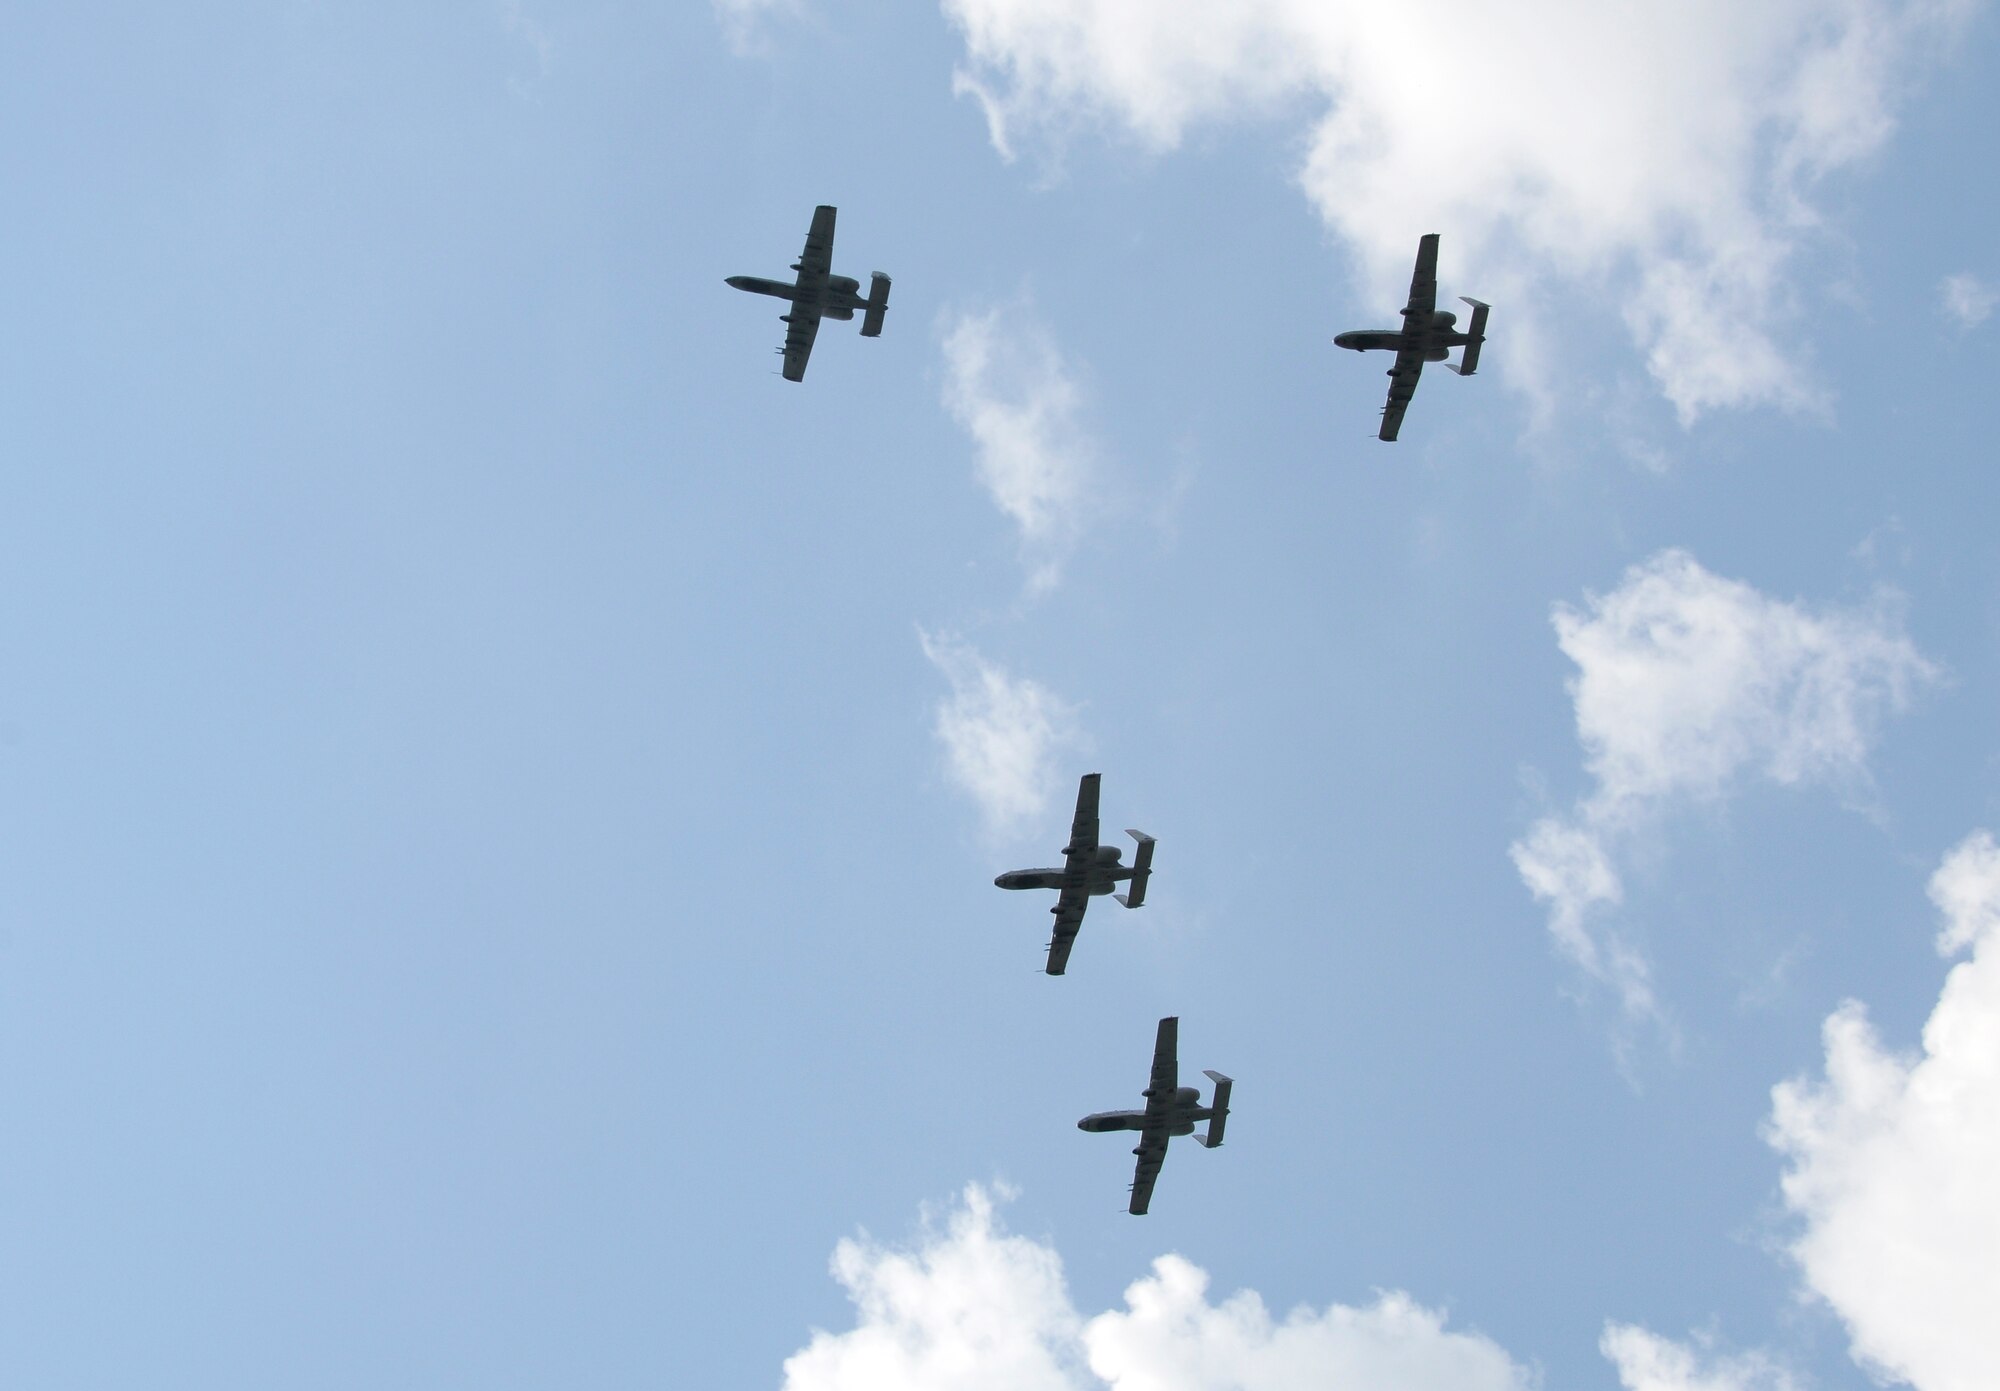 A four-ship of A-10C Thunderbolt II “Warthogs” with the Arkansas Air National Guard’s 188th Fighter Wing perform a missing man formation during a flyover to honor Capt. Virgil Meroney III during a repatriation ceremony held in Fayetteville, Ark., June 9, 2012. Meroney was missing in action during the Vietnam War after being shot down in his F-4D Phantom II aircraft, which crashed while carrying out a nighttime strike mission in Kahammouan Province, Laos. Meroney’s remains were identified May 24 and were returned to his family for burial with full military honors. Col. Mark Anderson, 188th Fighter Wing commander; Lt. Col. Brian Burger, 188th Operations Group commander; Maj. Justin Lewis; and Capt. Mark Cox performed the flyover.  (National Guard photo by Airman 1st Class Hannah Landeros/188th Fighter Wing Public Affairs)